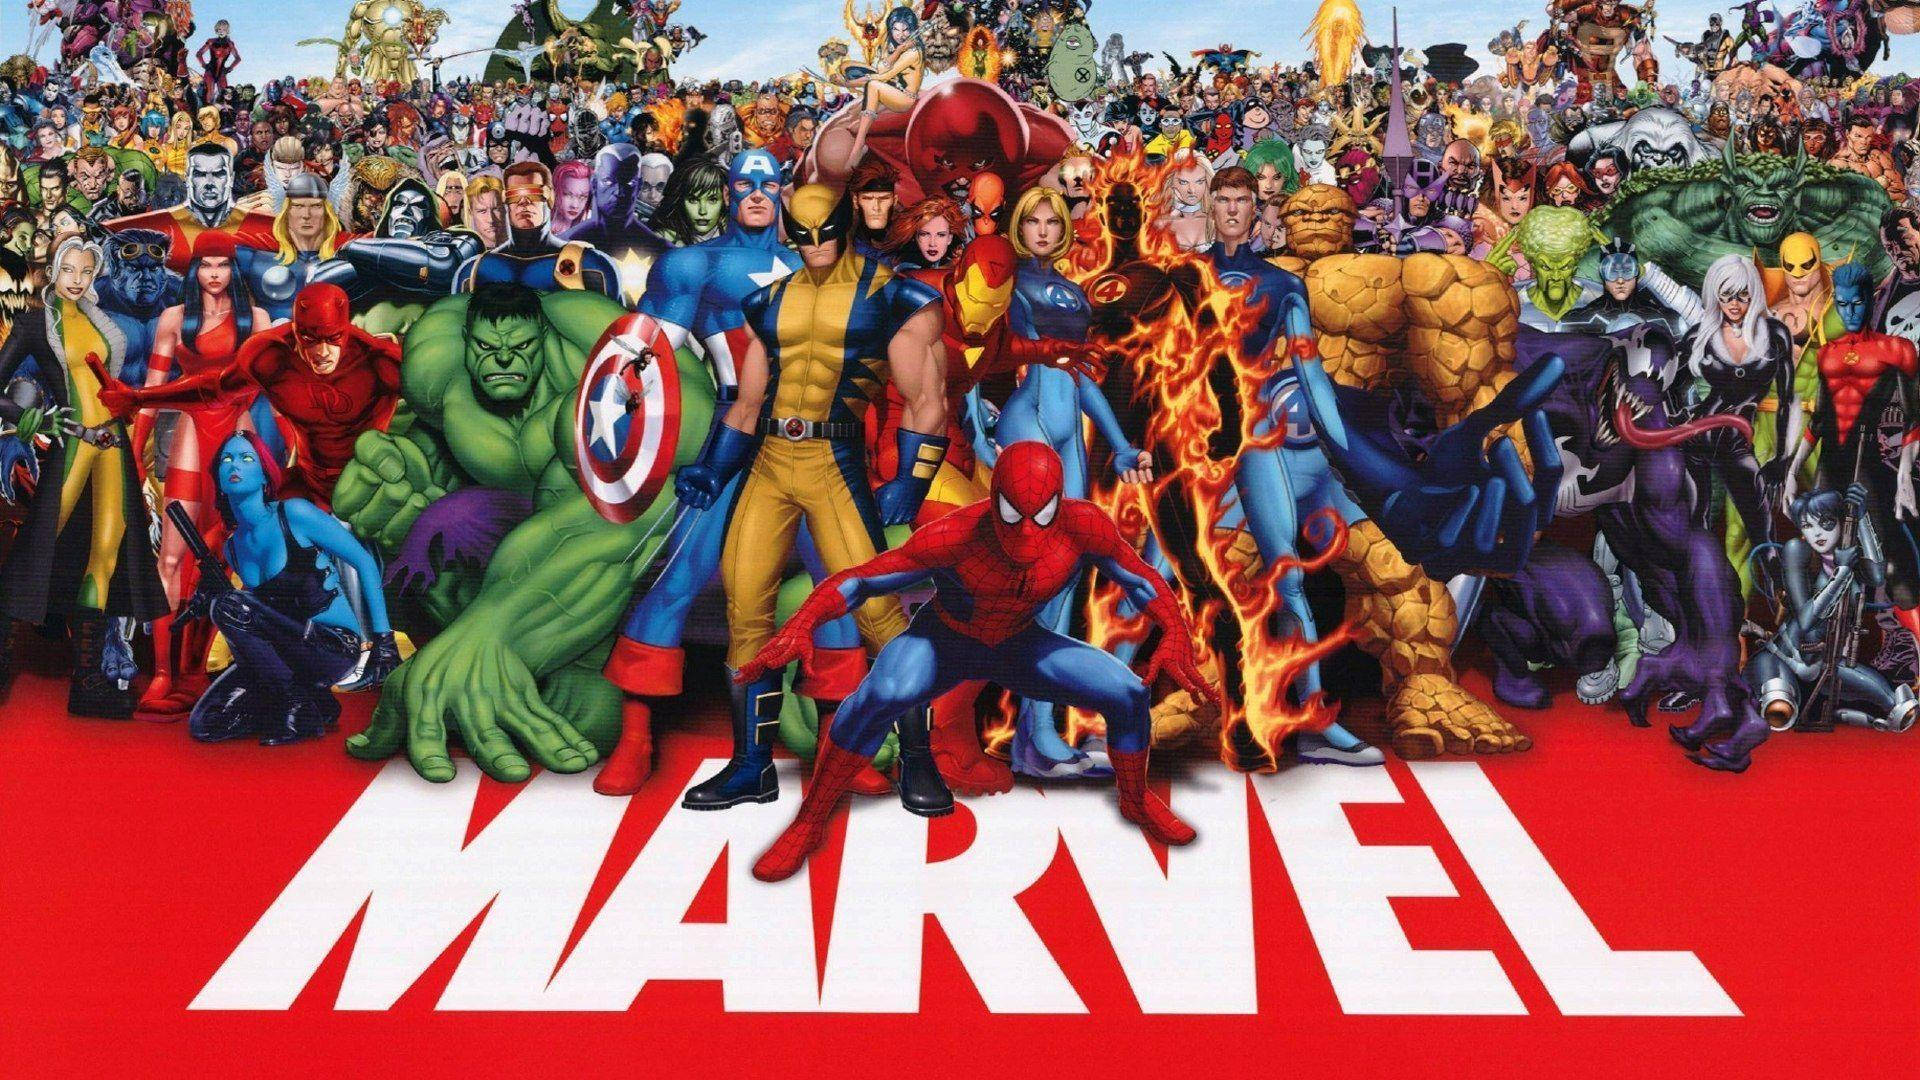 "A Poster showcasing all the Marvel Superheroes" Wallpaper